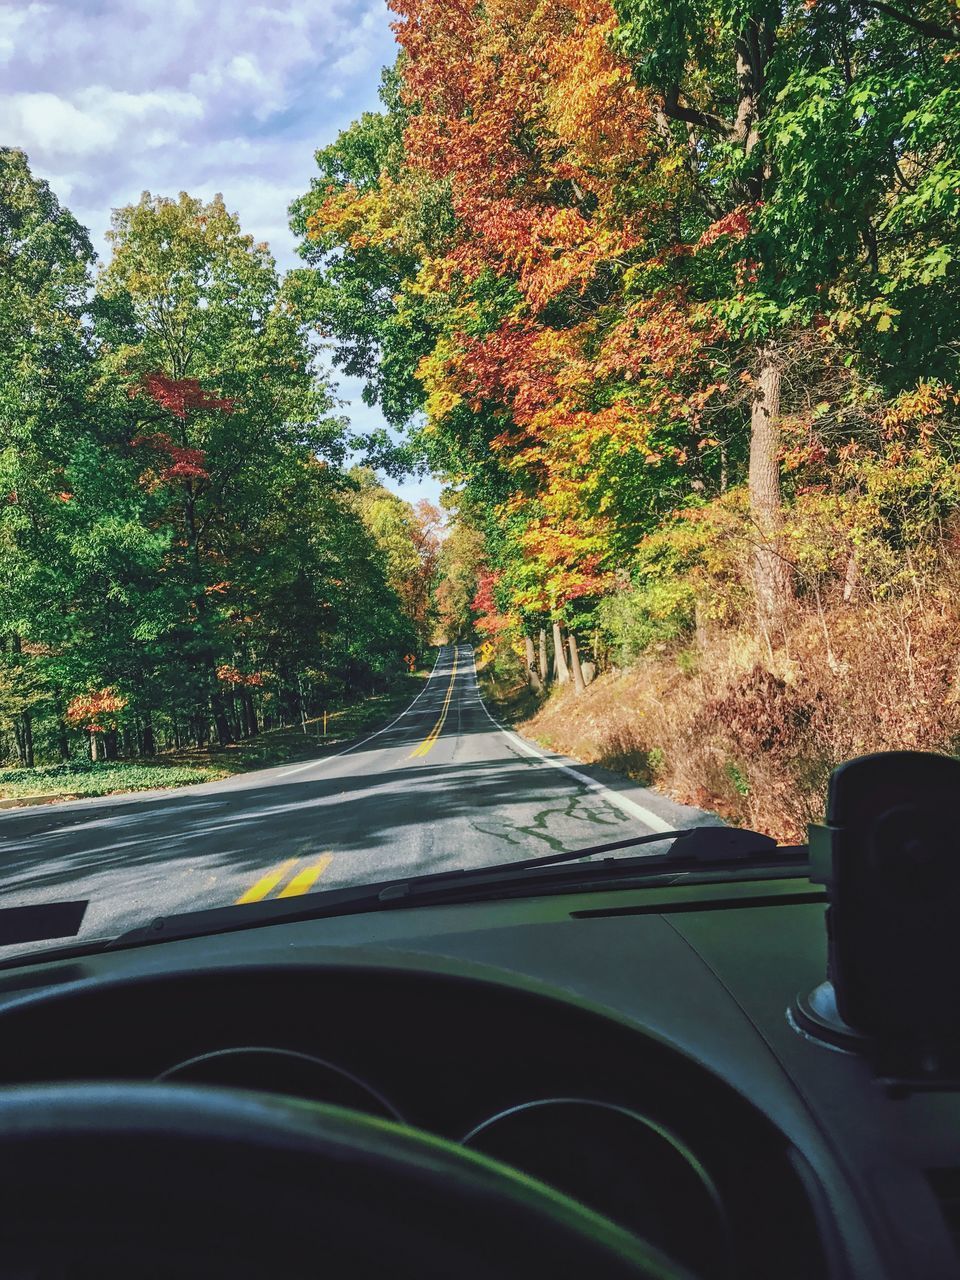 ROAD AMIDST TREES SEEN THROUGH CAR WINDSHIELD DURING AUTUMN